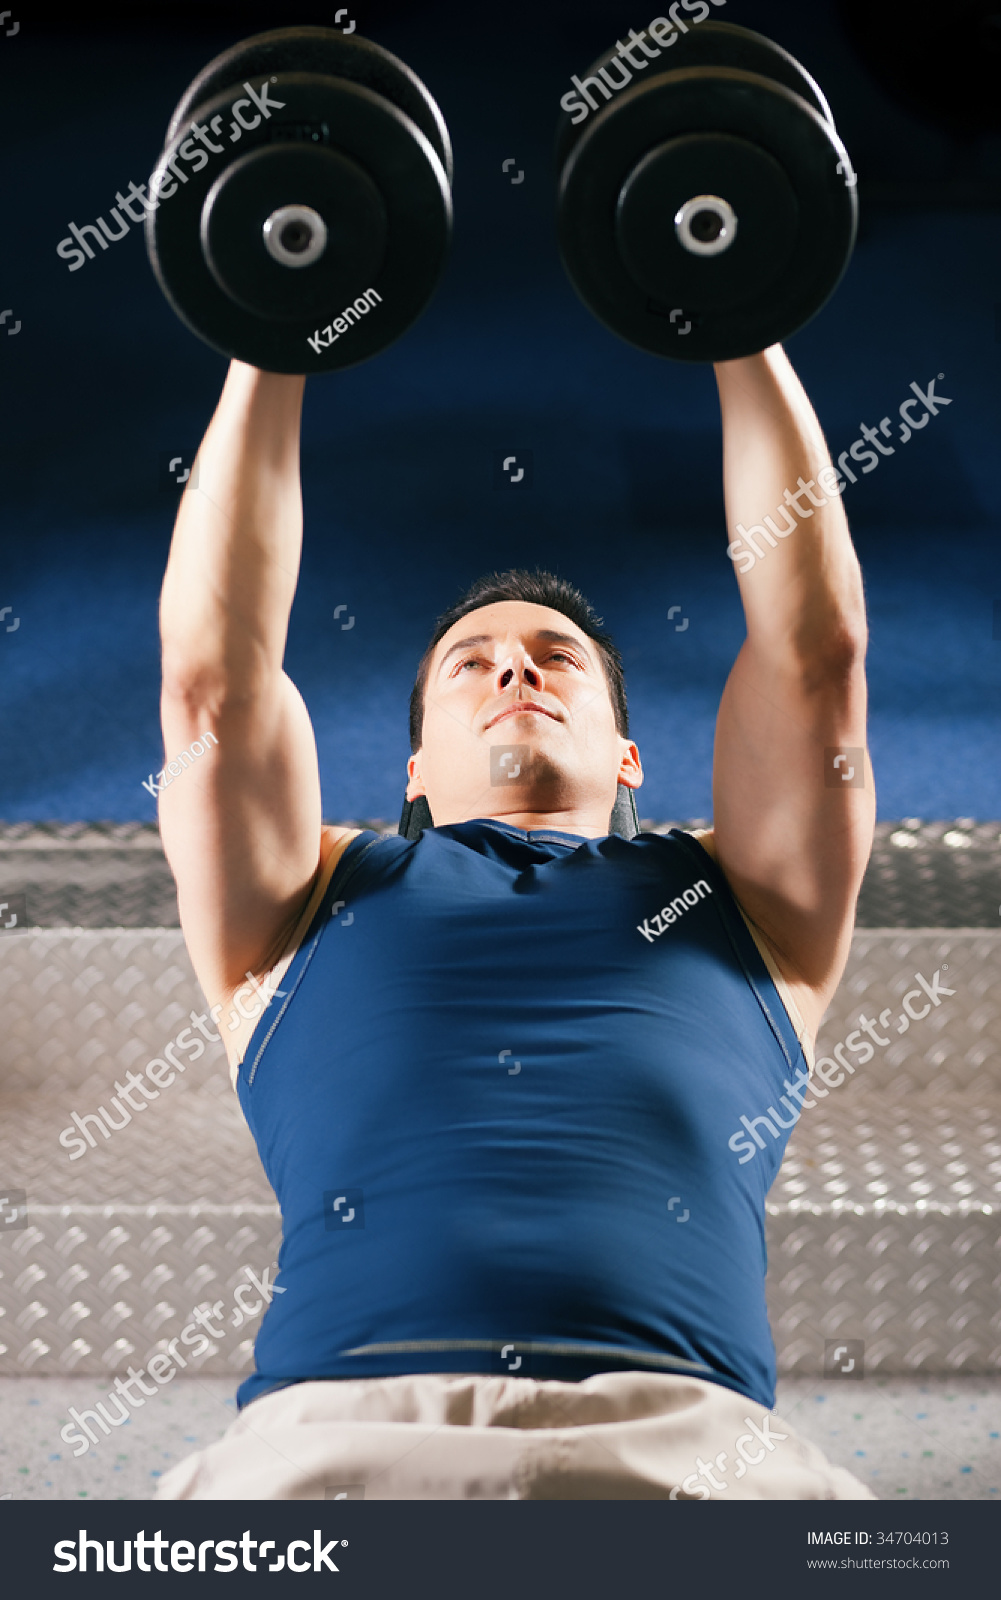 Very Strong And Handsome Man Lifting Weights Dumbbells In A Gym Stock